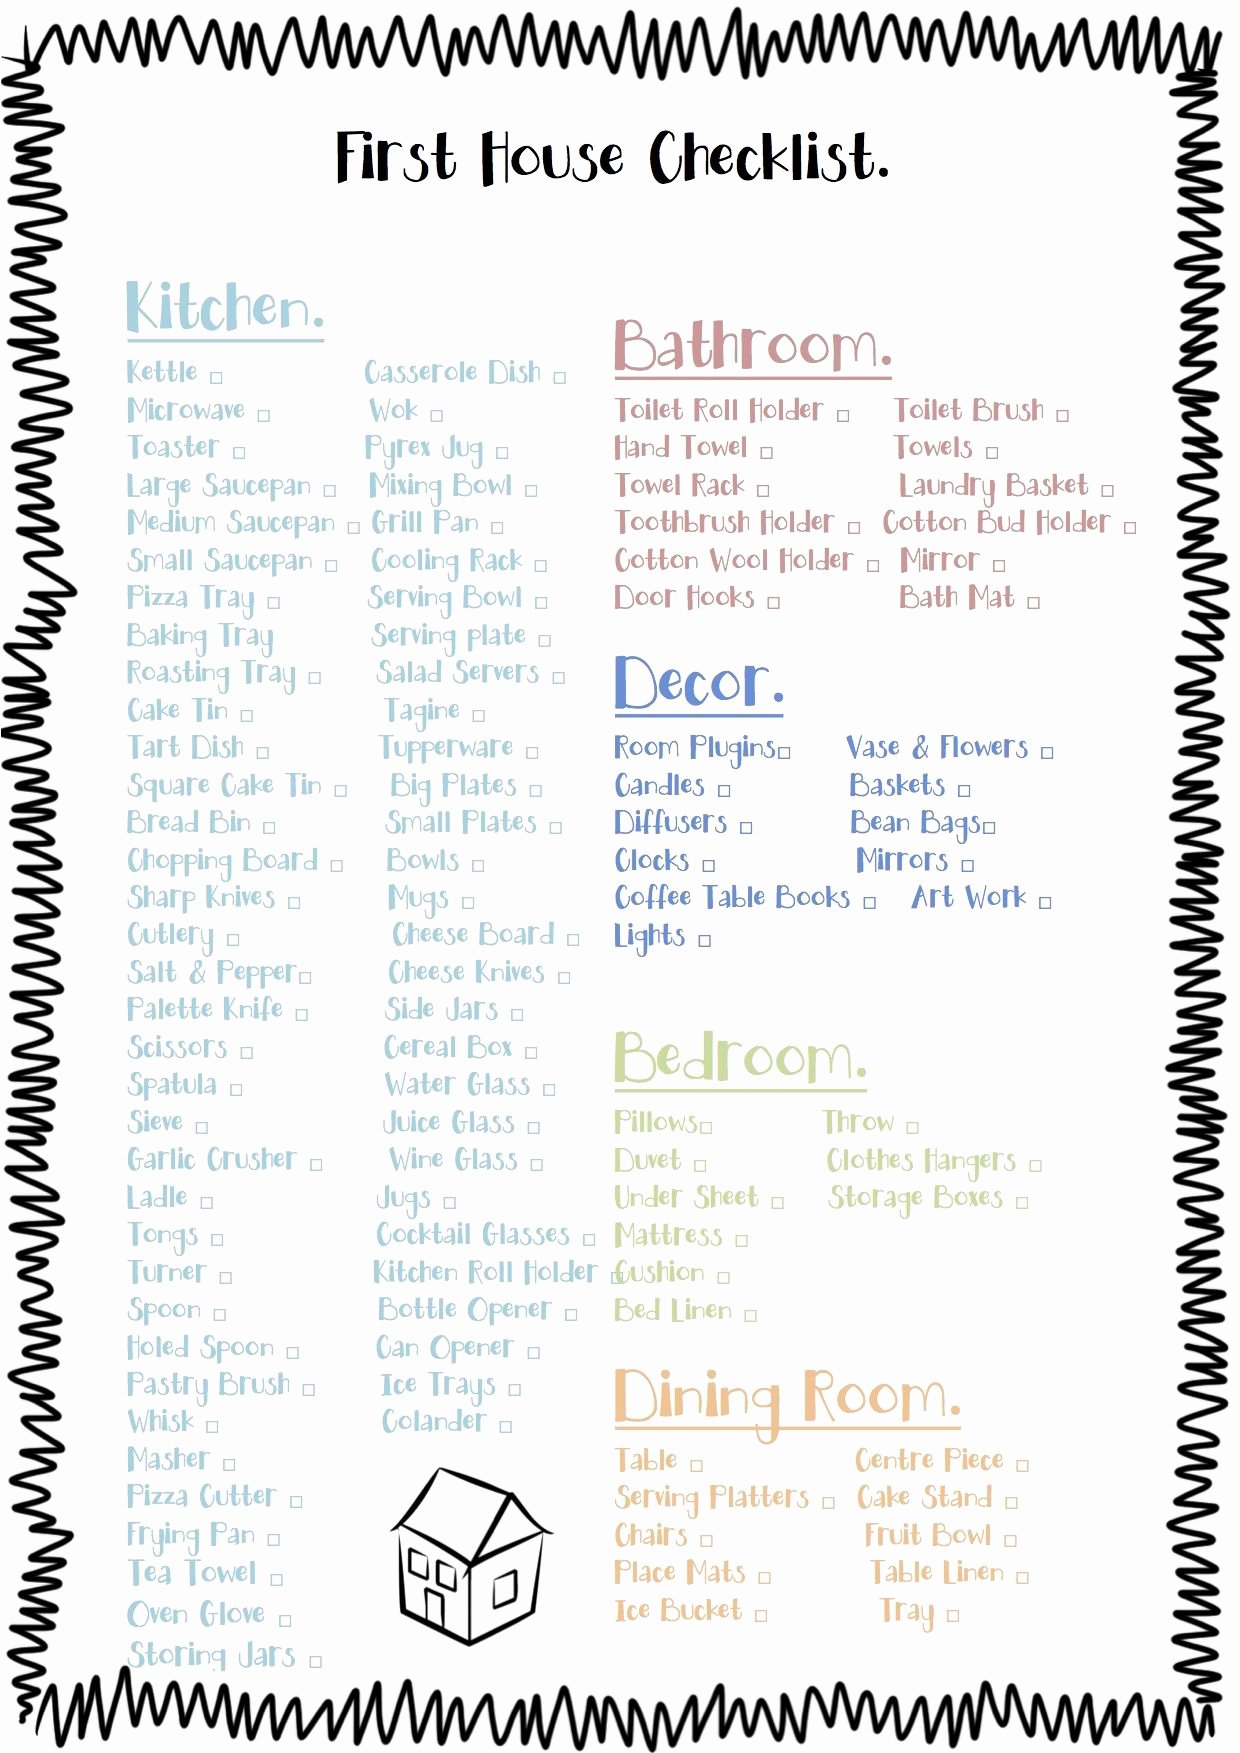 Buying A House Checklist Template Elegant Free Printable Check List for the Essentials to for A